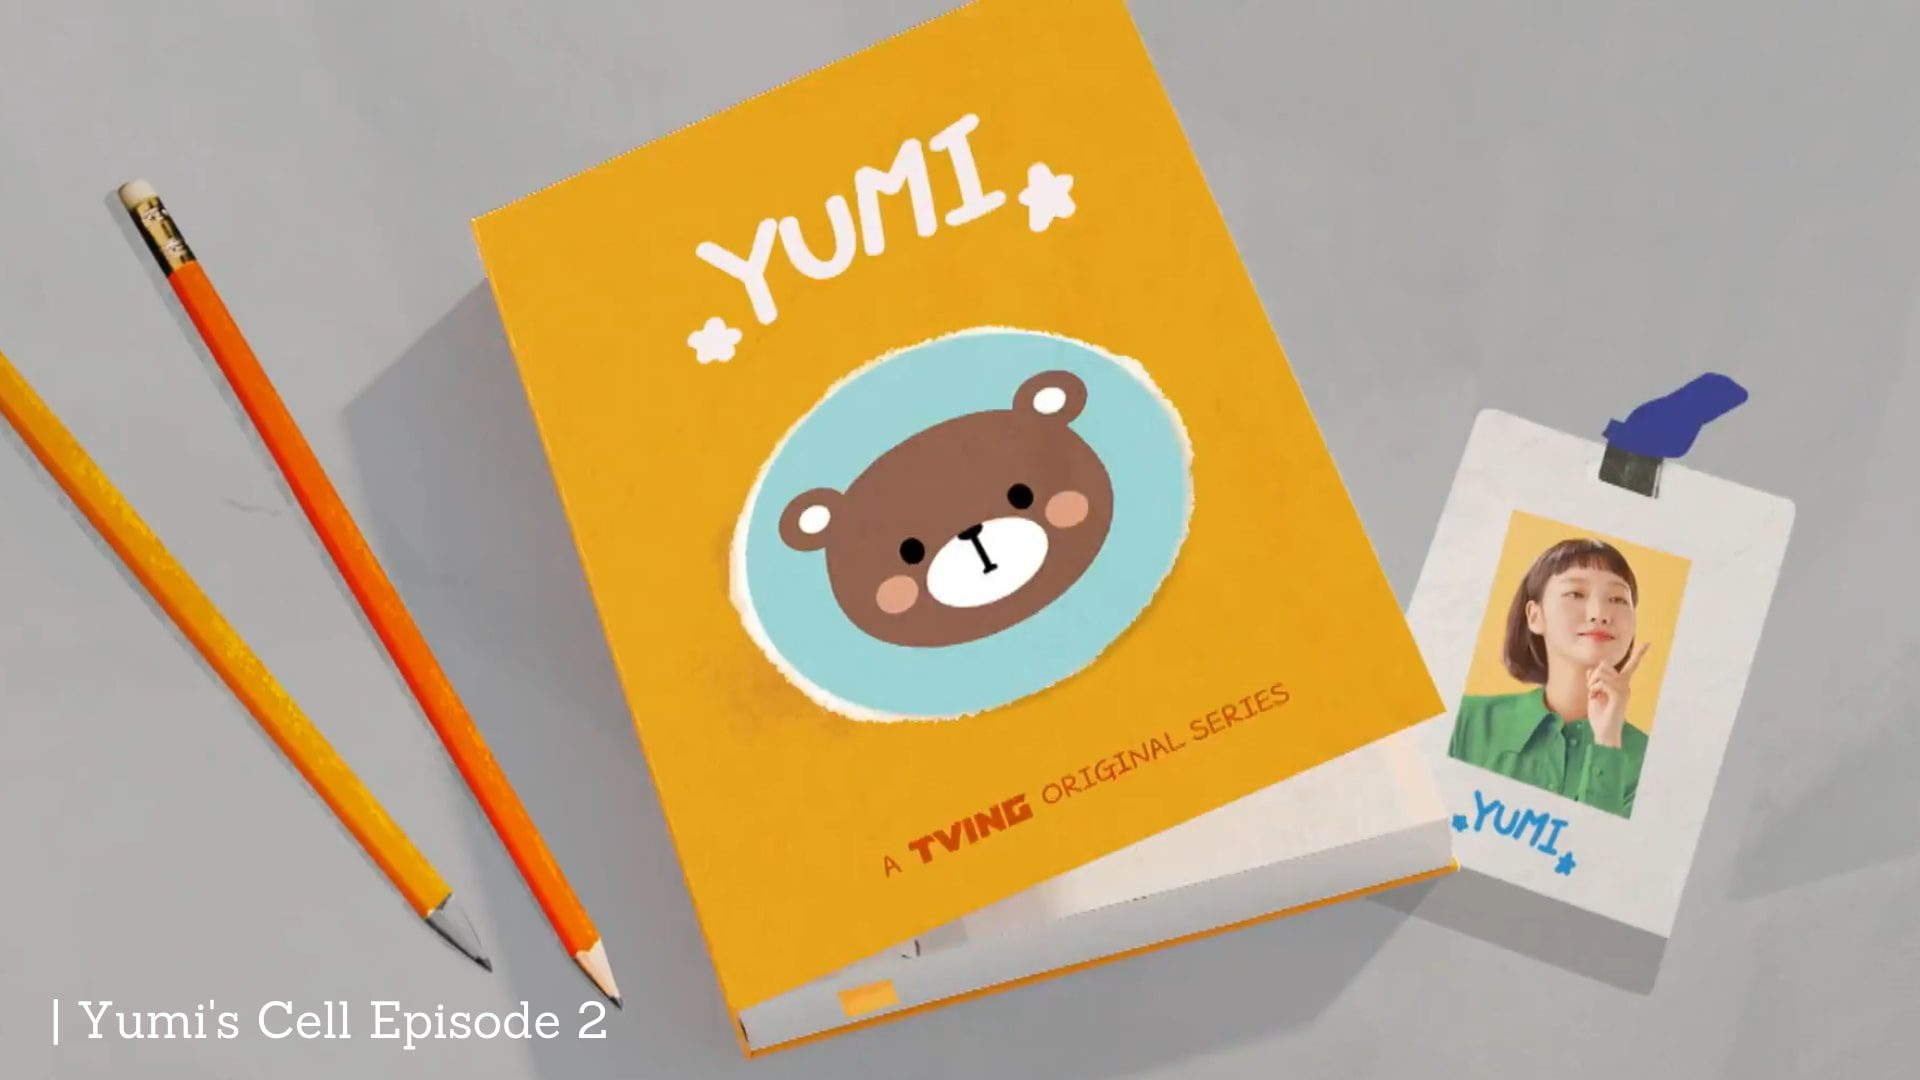 Yumi's Cells Episode 2